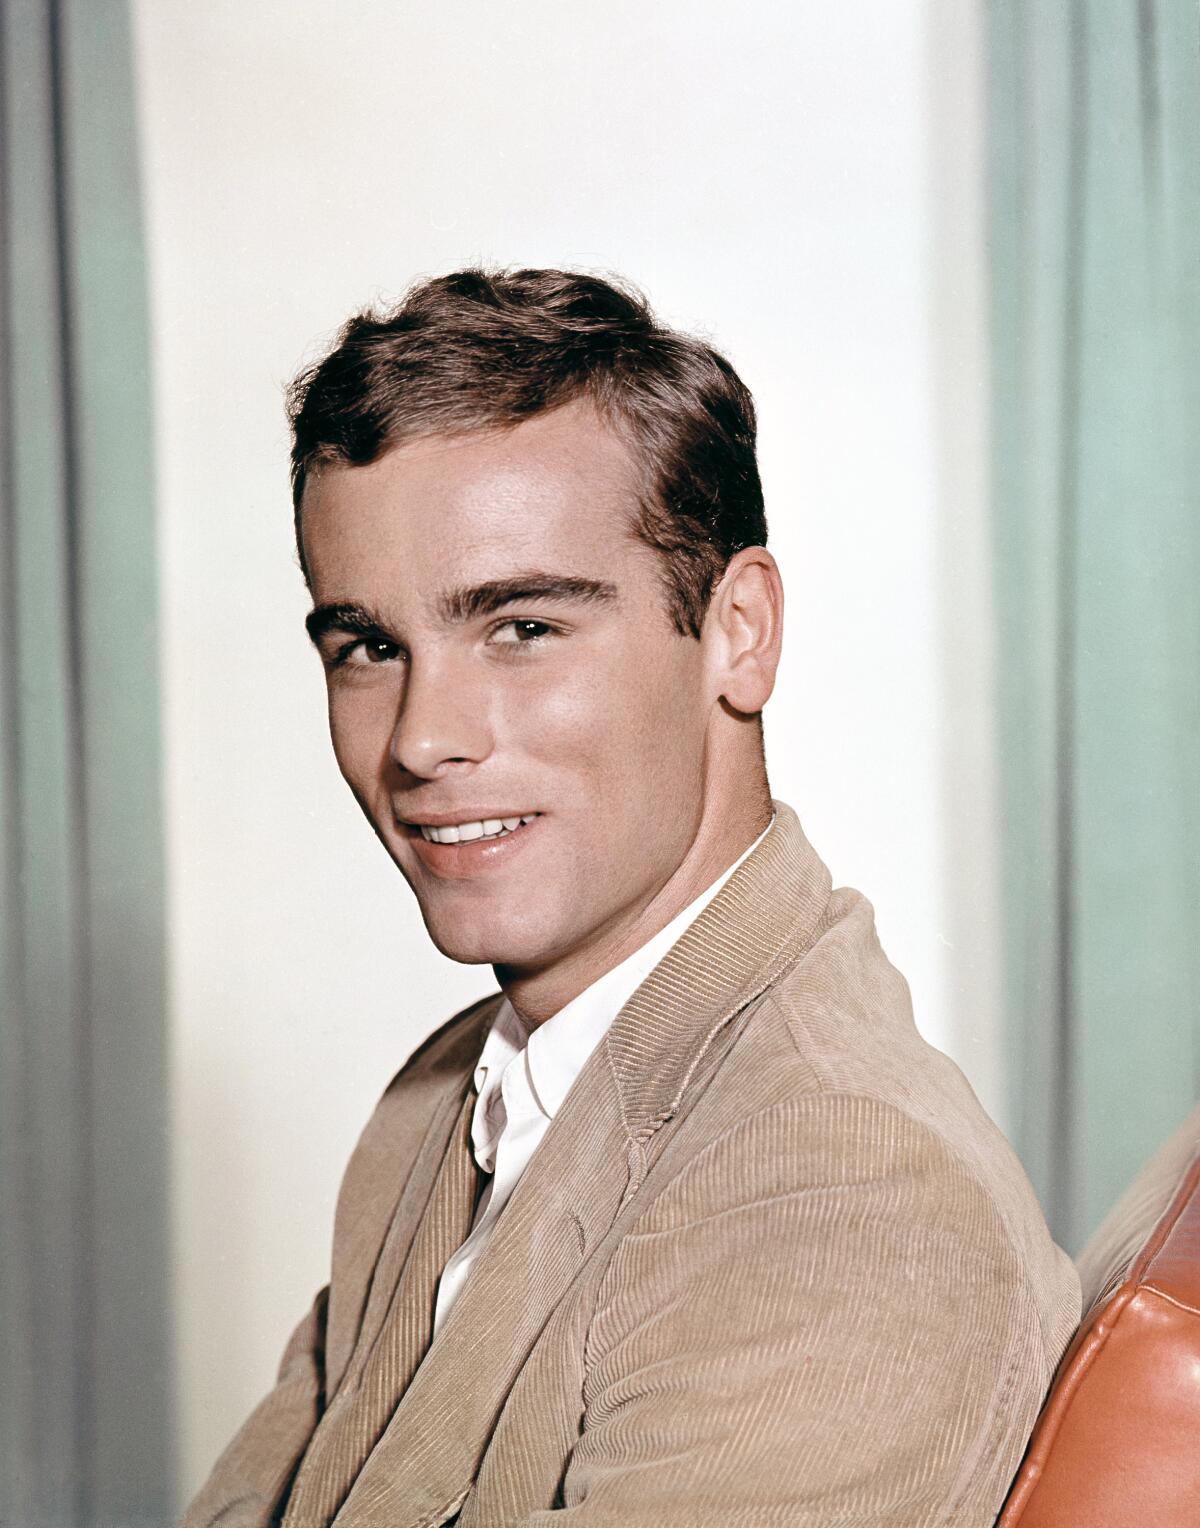 A handsome, clean-cut Dean Stockwell, in the 1950s.